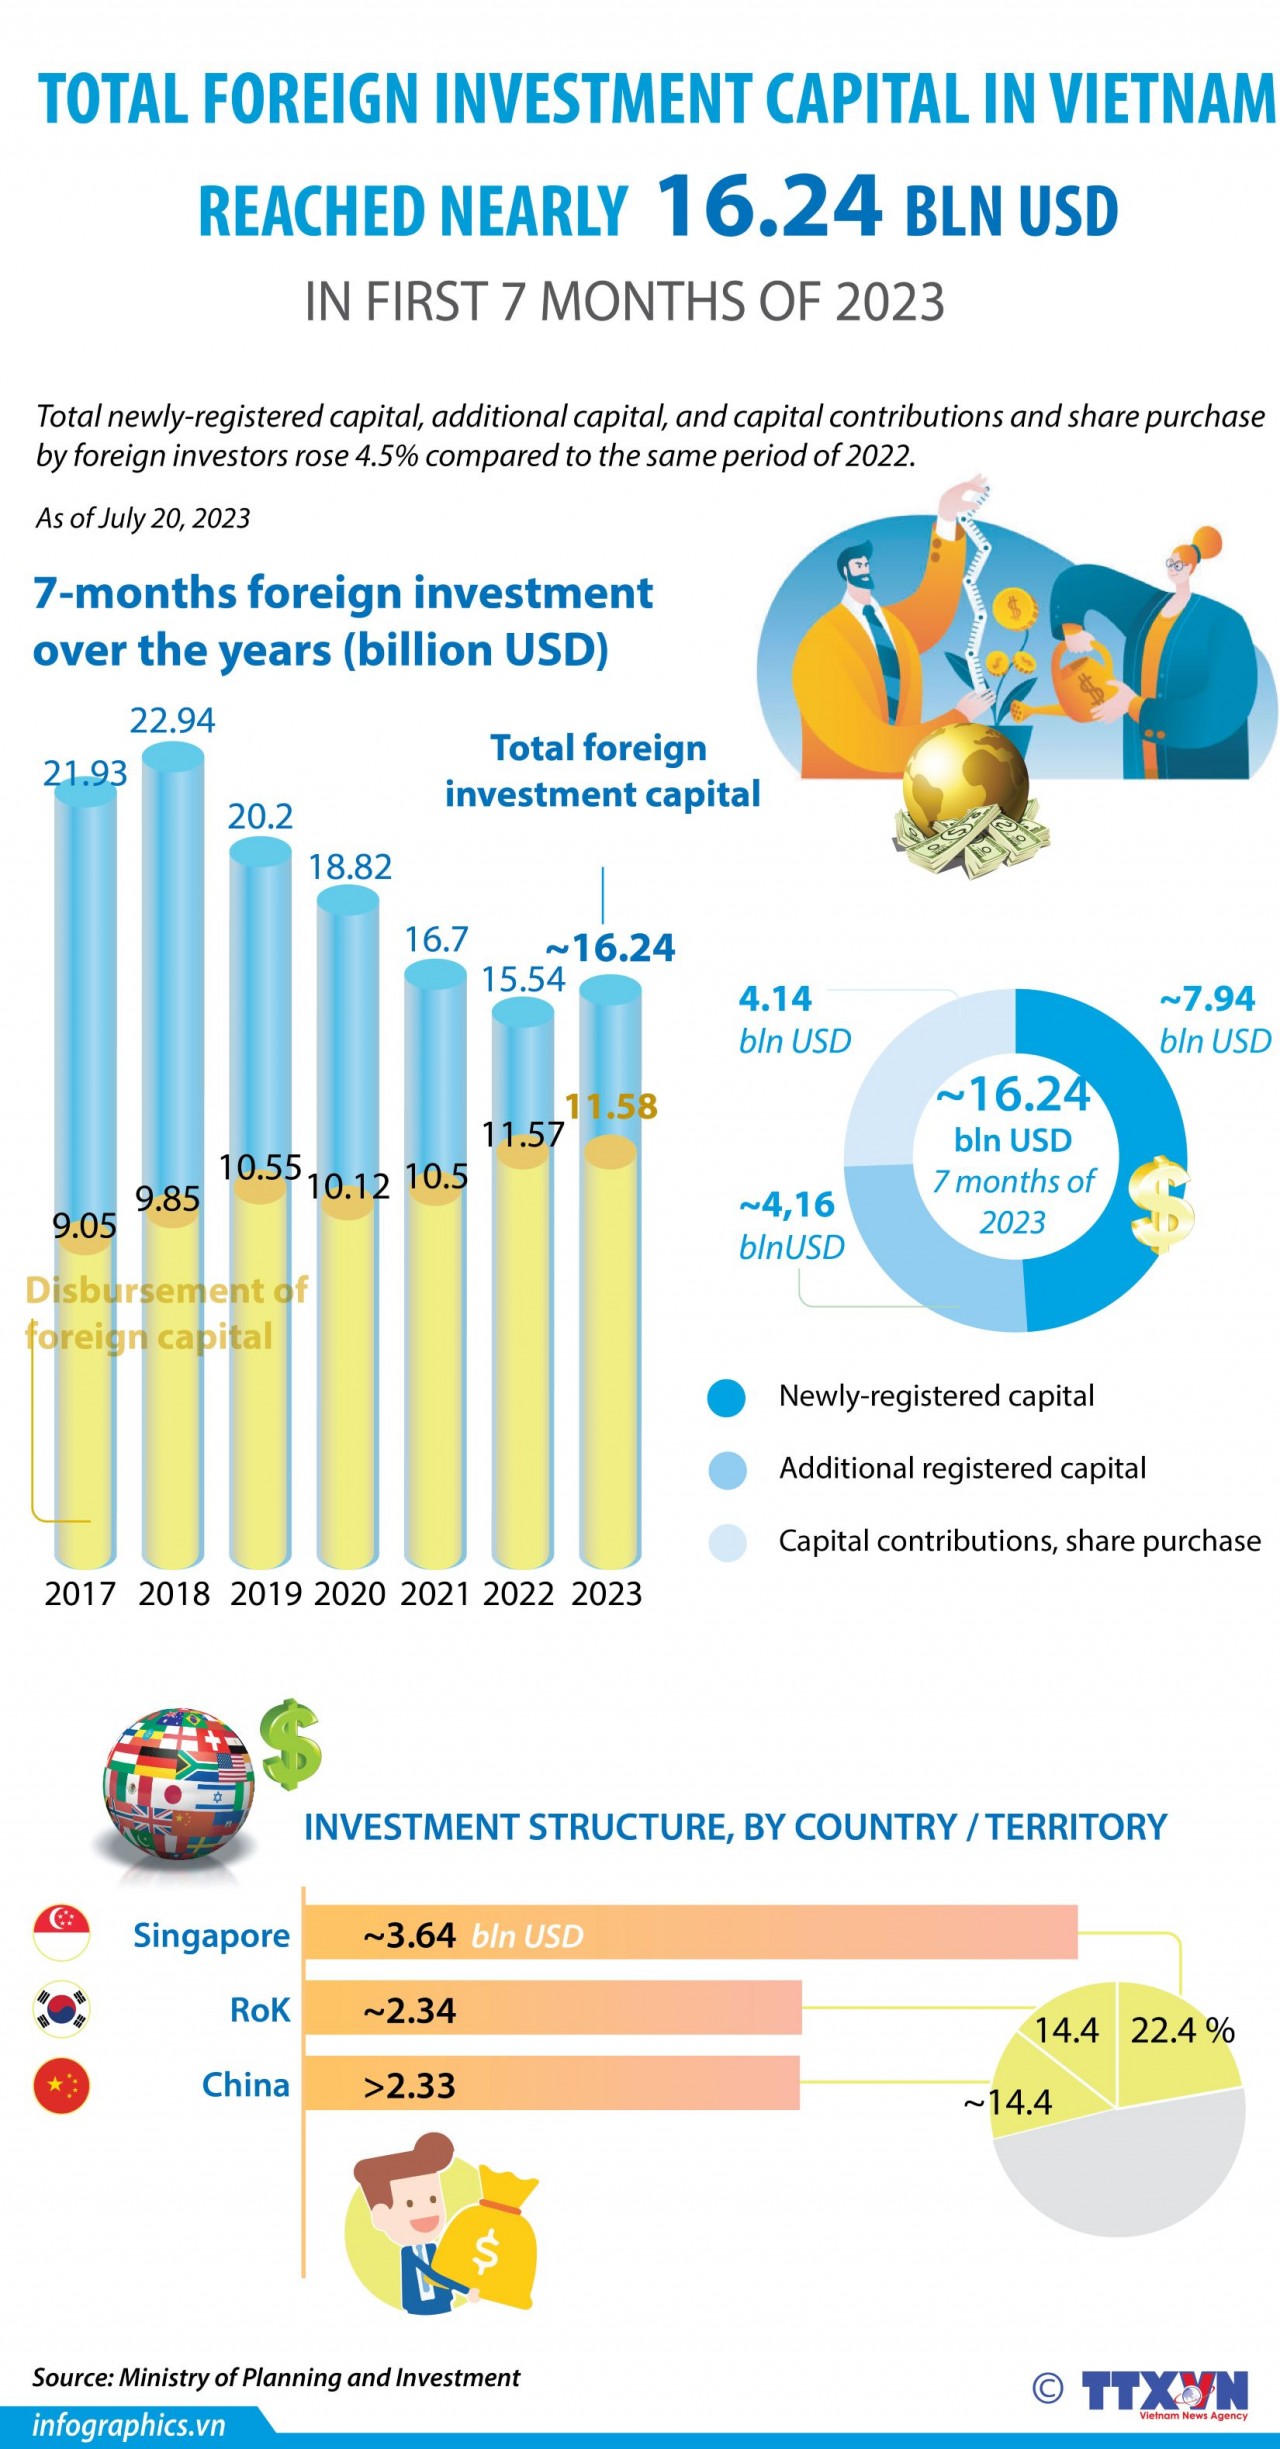 Vietnam lures over 16 billion USD in foreign investment. (Source: VNA)